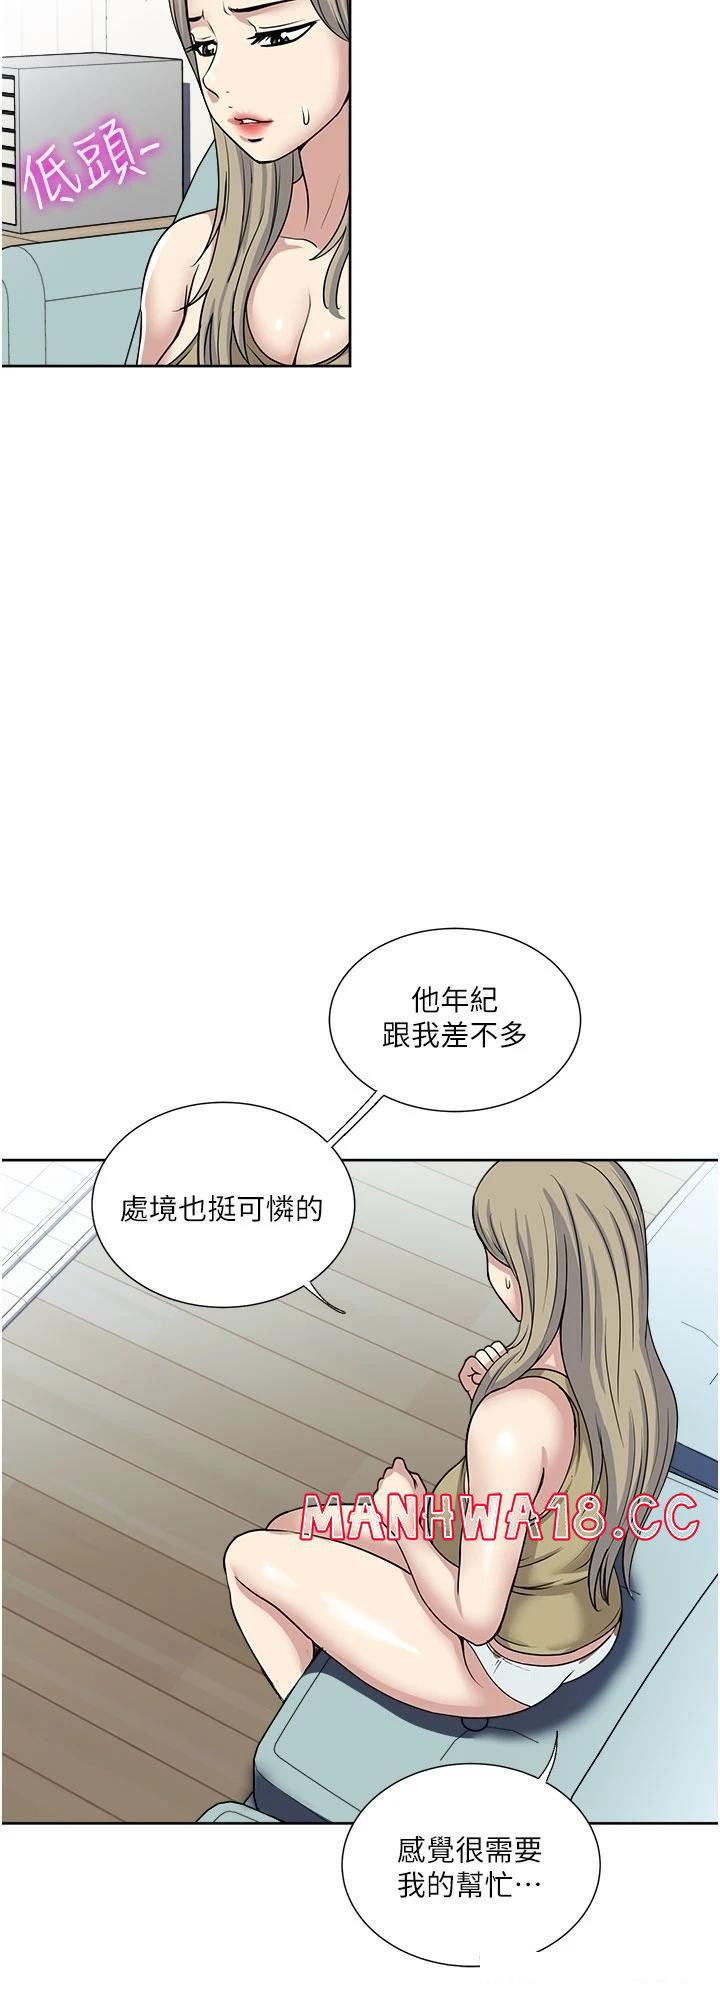 just-once-raw-chap-38-27